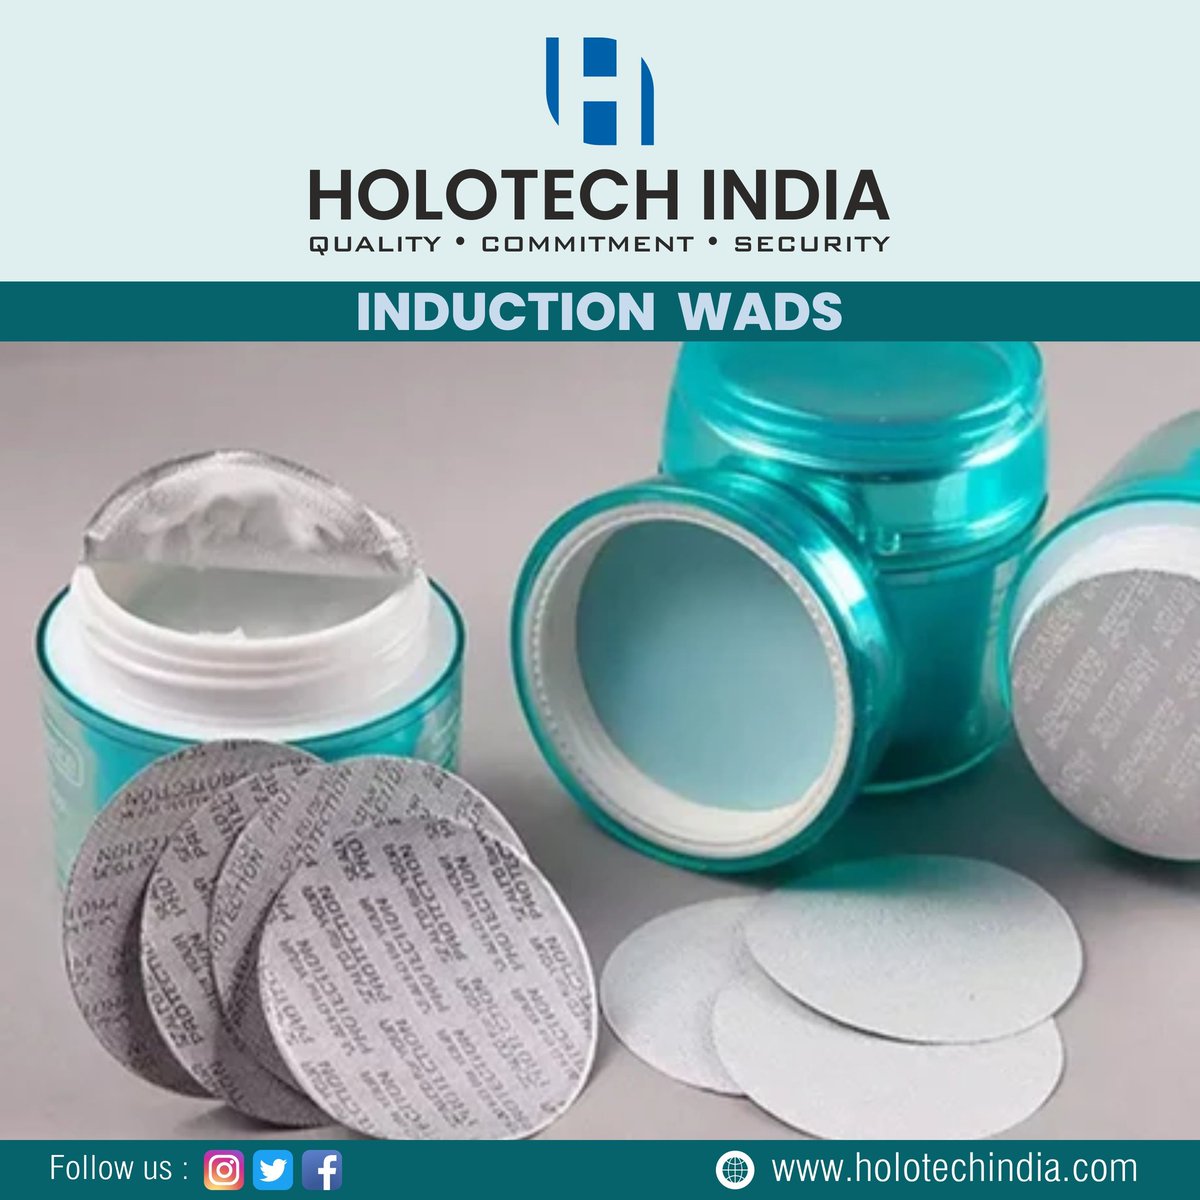 Need Induction Wads? 
Contact us for more details and get best quotation from us. 

📧: holotechindia@gmail.com 

#holotech #india #holotechindia #inductionwads #wads #seal #stickers #hologram #print #experts #originals #holograms #hologramsticker #security #securitysystem